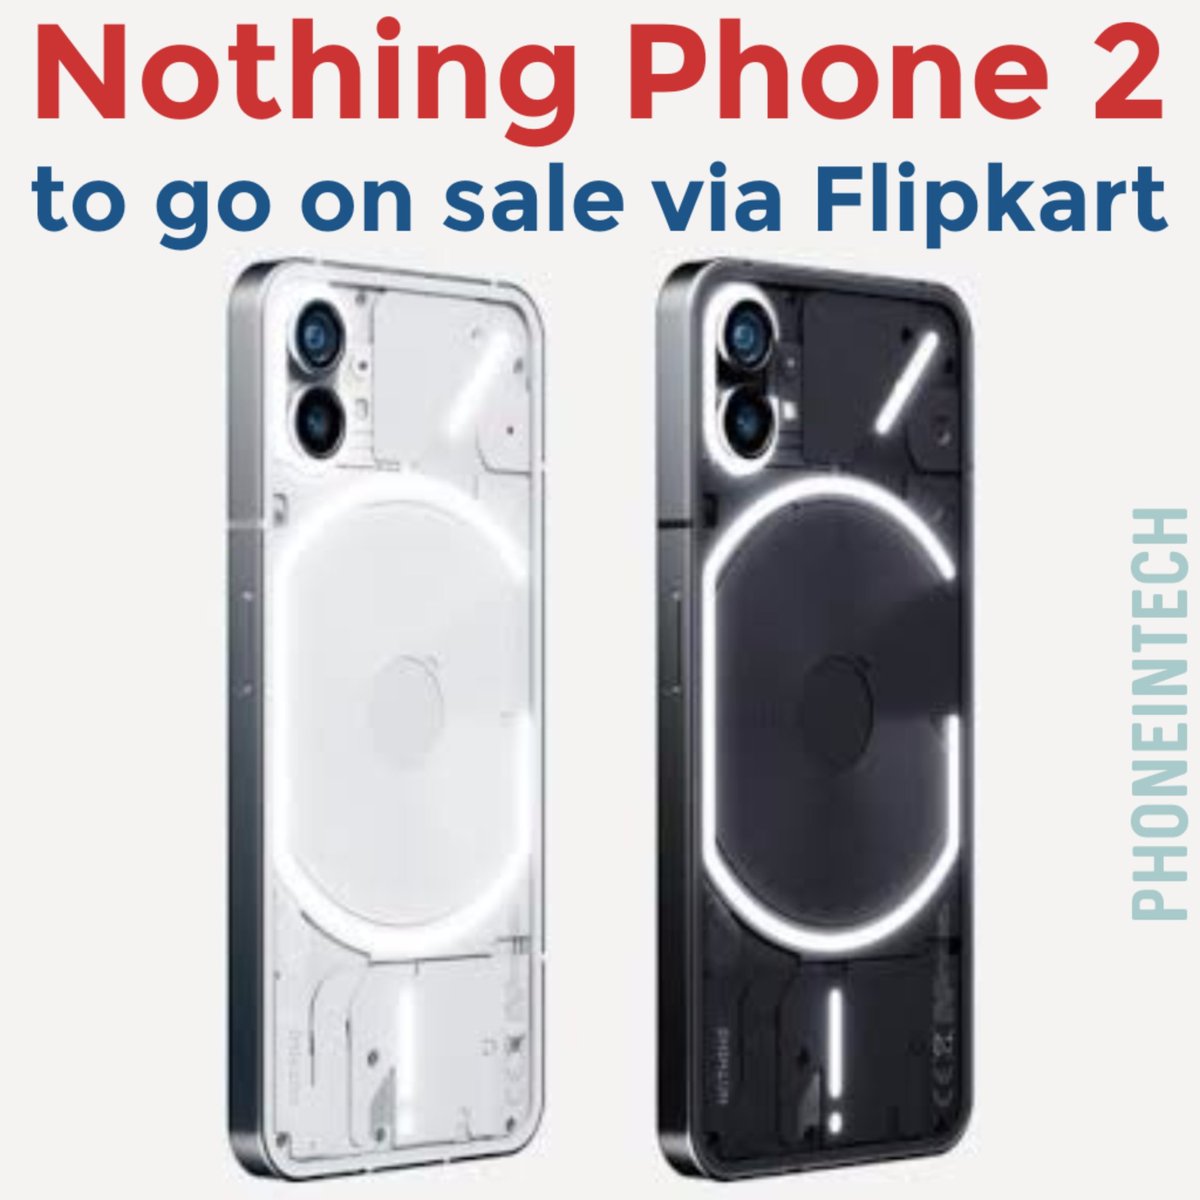 Nothing Phone 2 to launch in India through Flipkart. It will be available from July 11. It features a 4,700 mAh battery and will run on Snapdragon 8+ Gen 1 SoC. Will you buy this ?